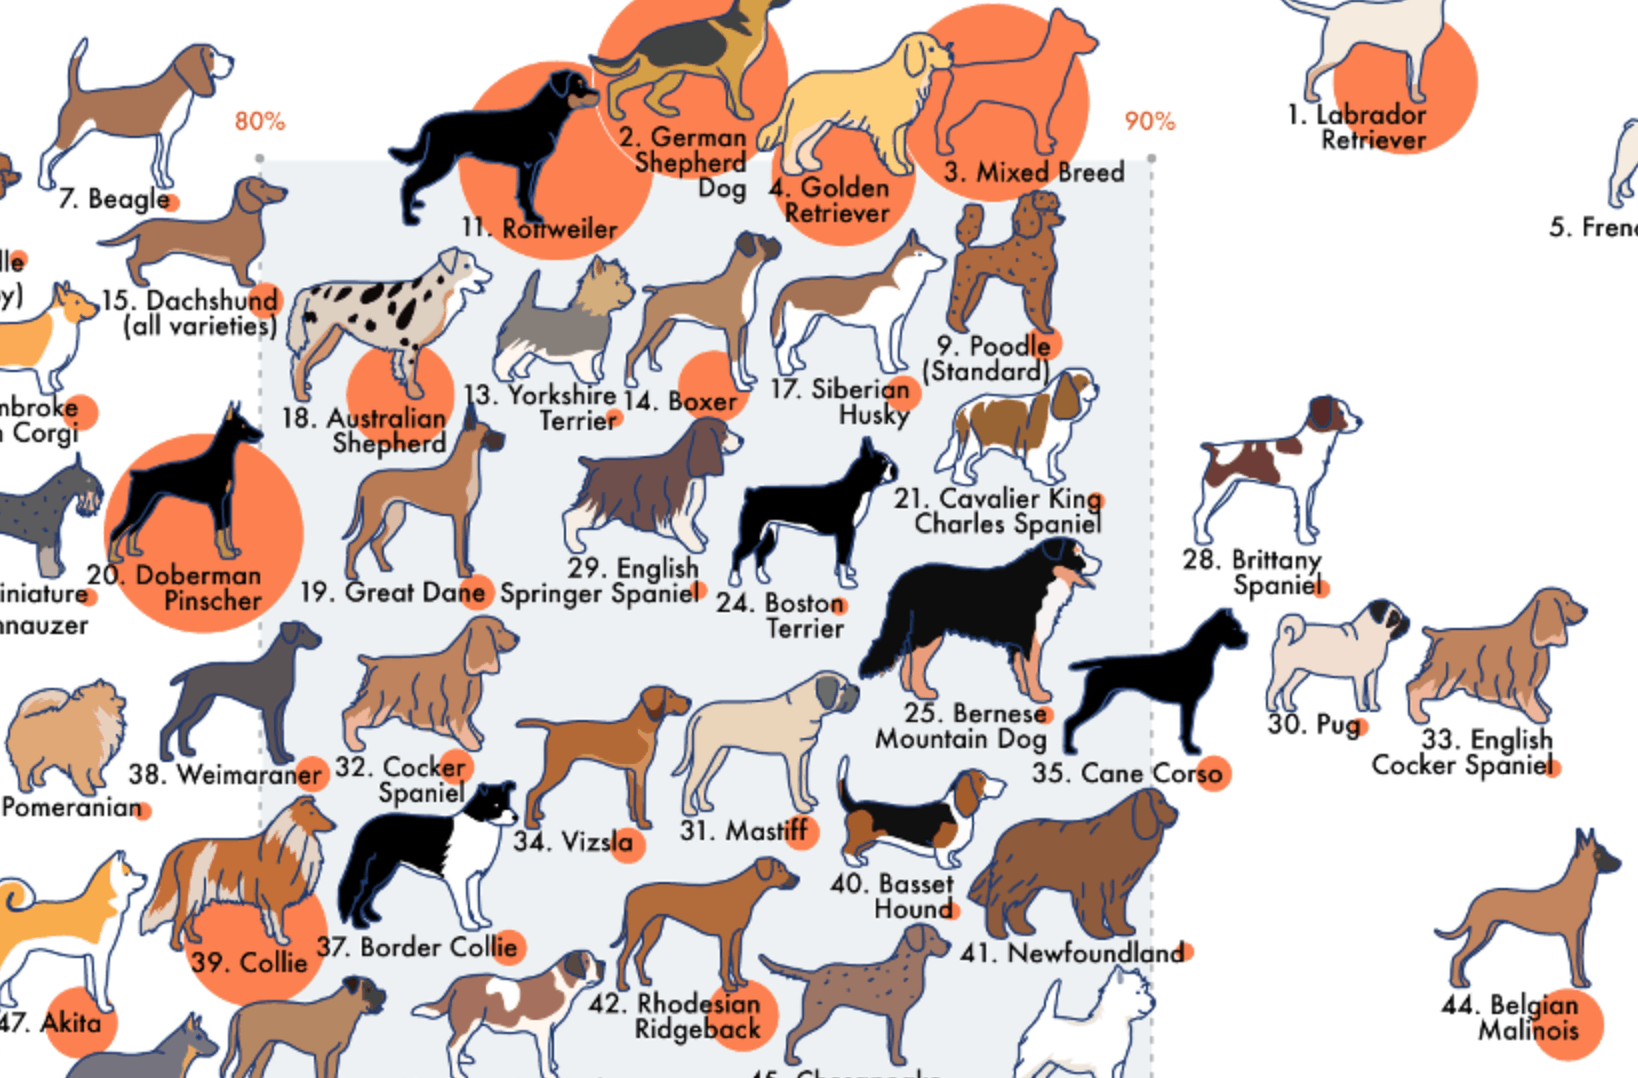 this-infographic-visualizes-dog-breeds-ranked-by-temperament-the-dogington-post